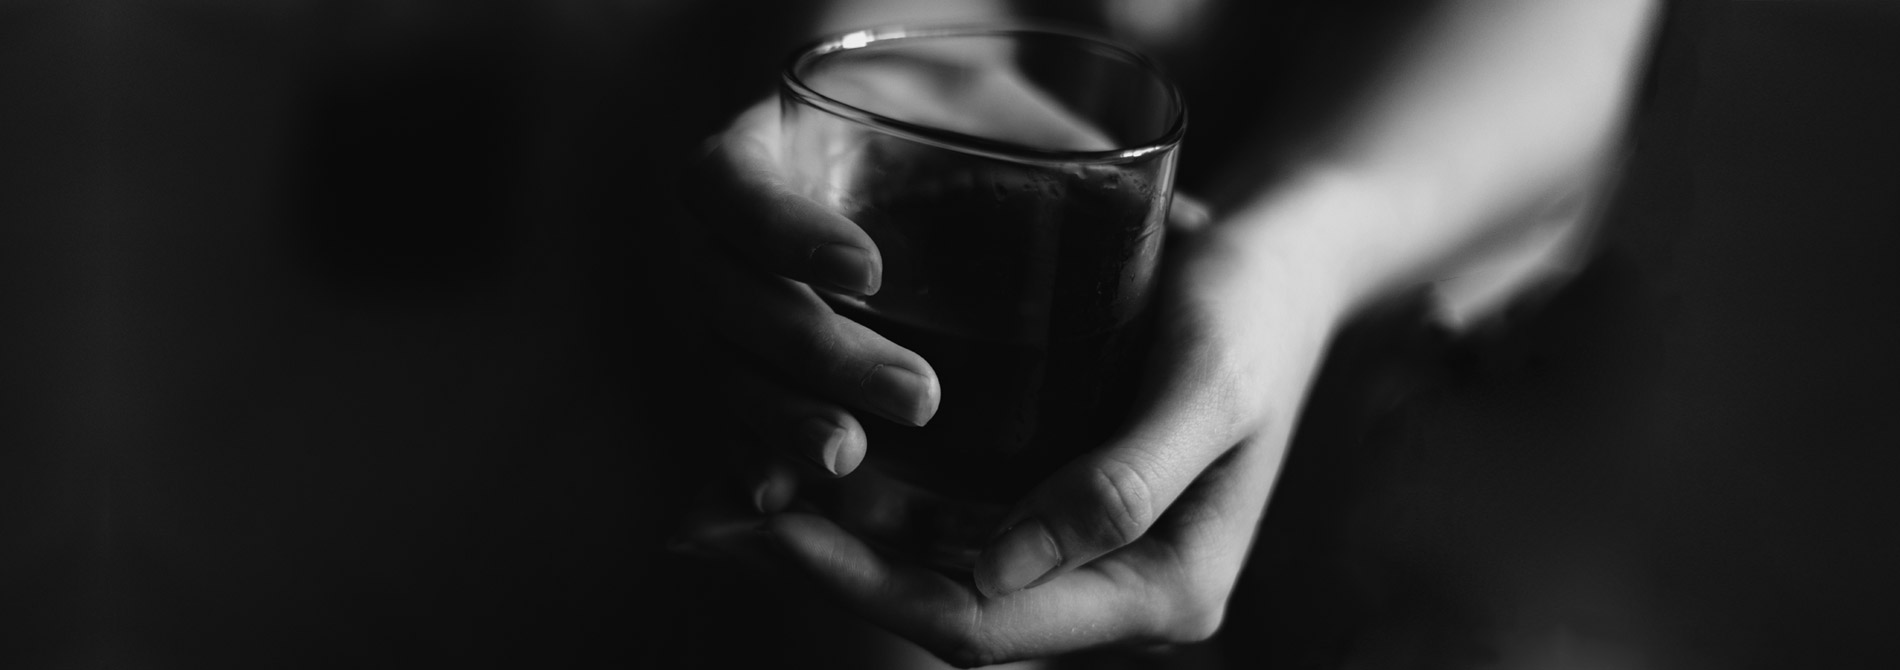 woman's hands holding a drink